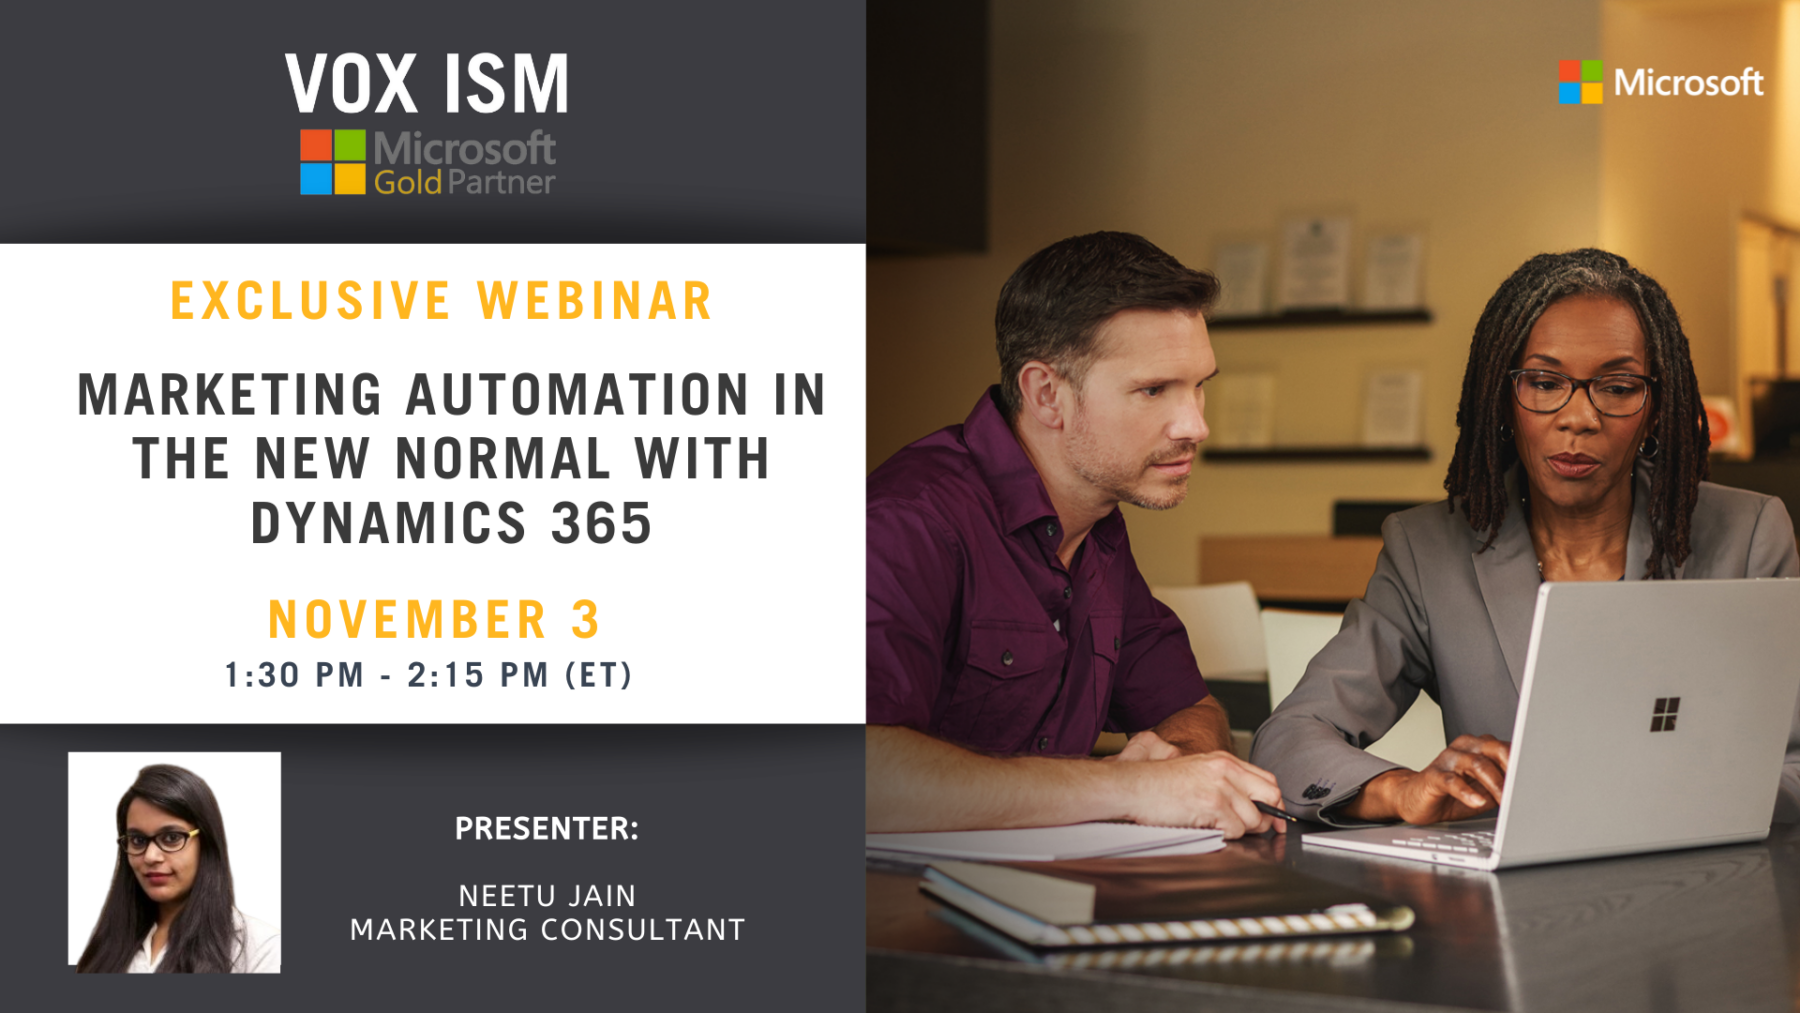 Marketing Automation in the new normal with Dynamics 365